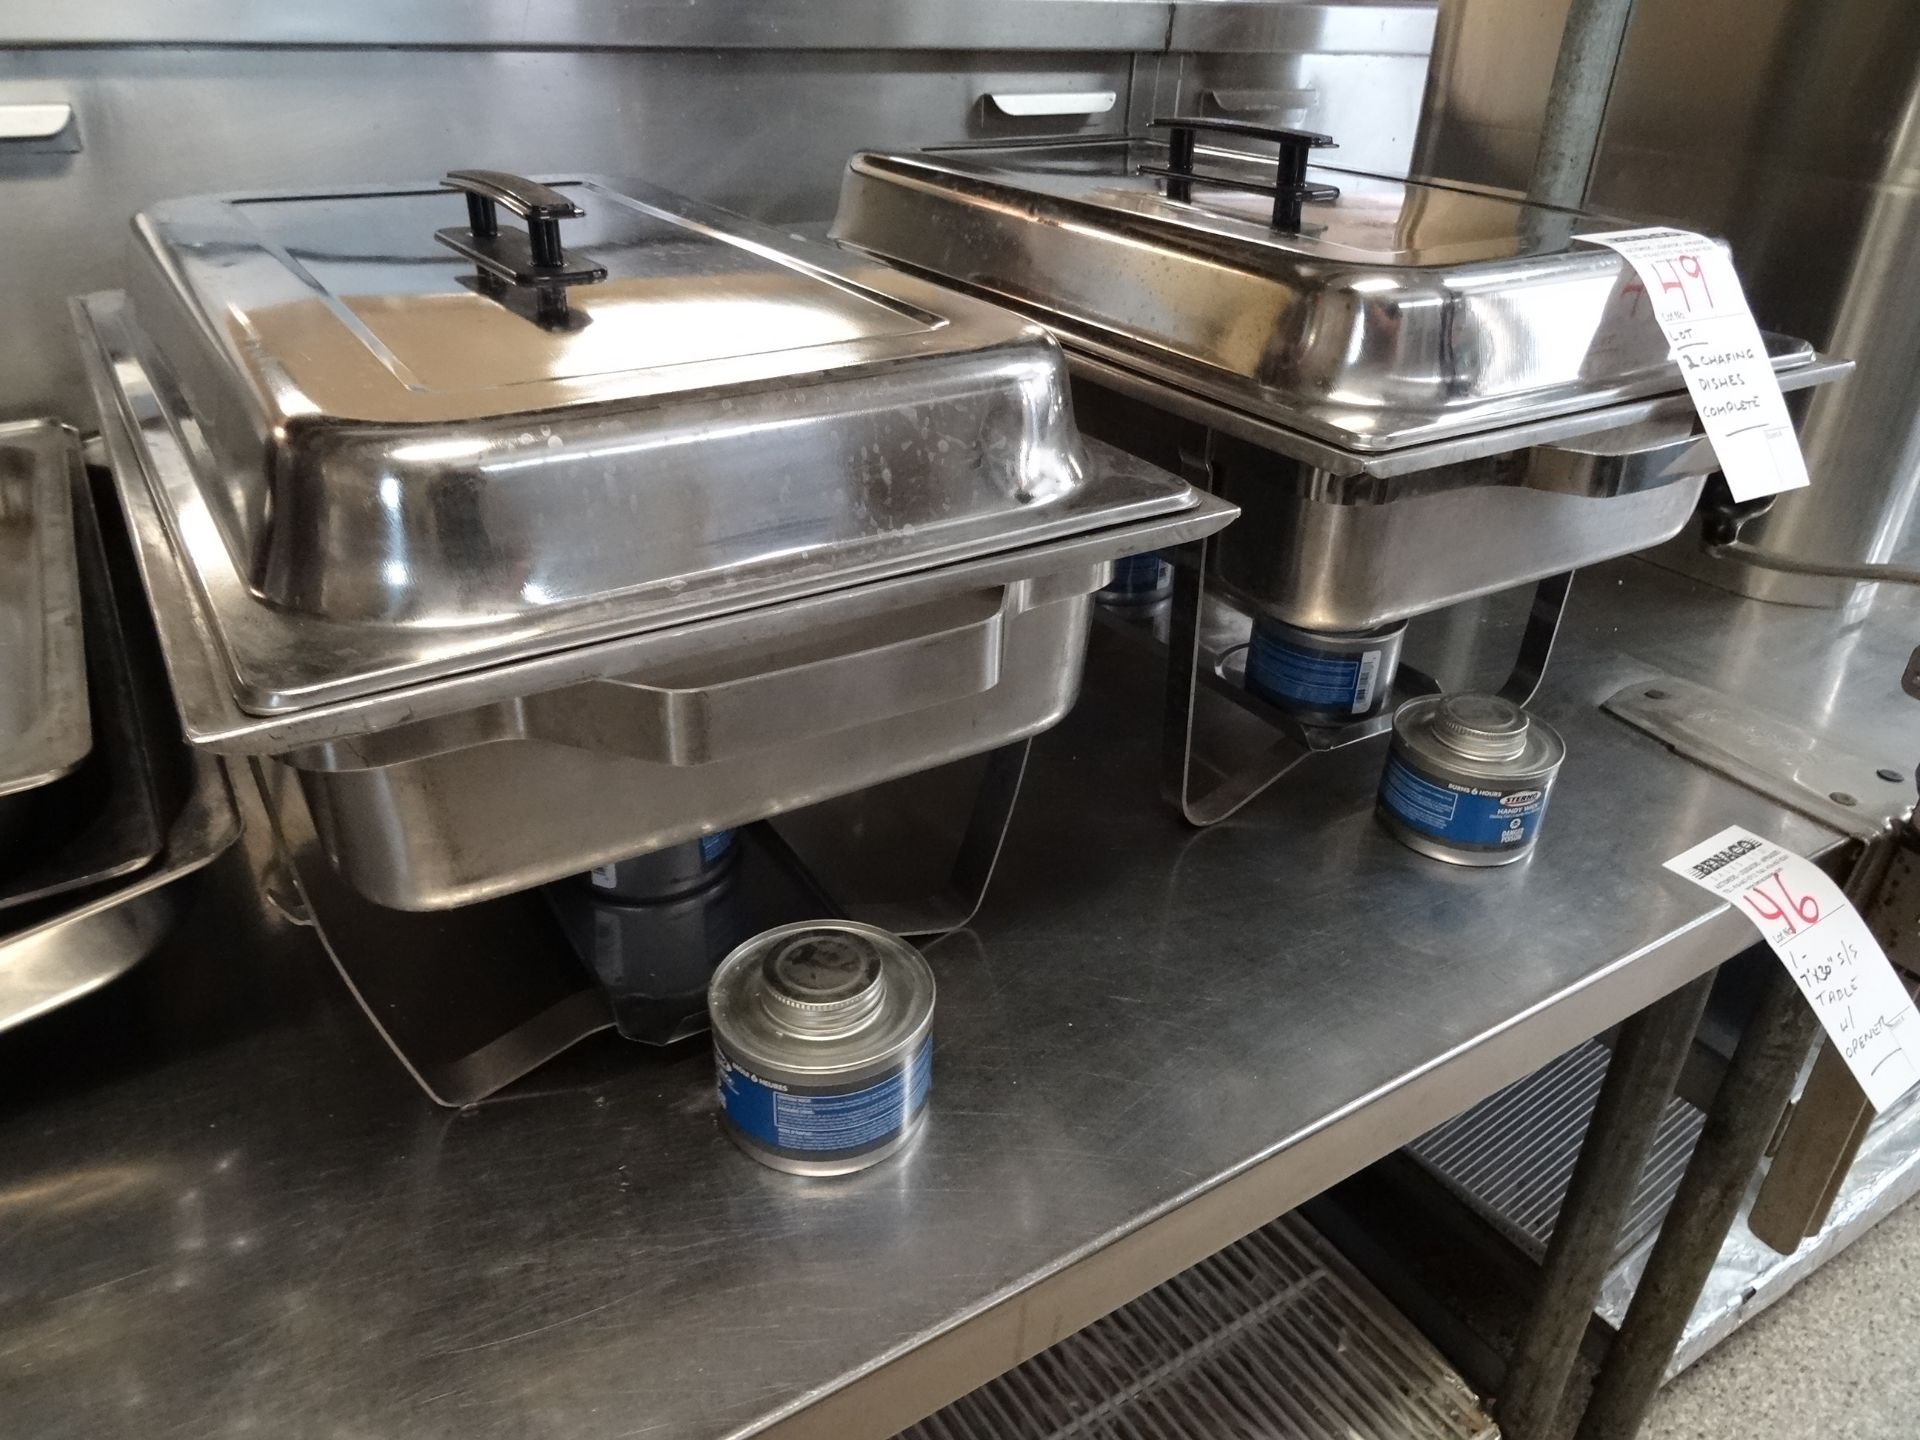 LOT, 2X S/S CHAFING DISHES W/ LIDS - Image 2 of 3